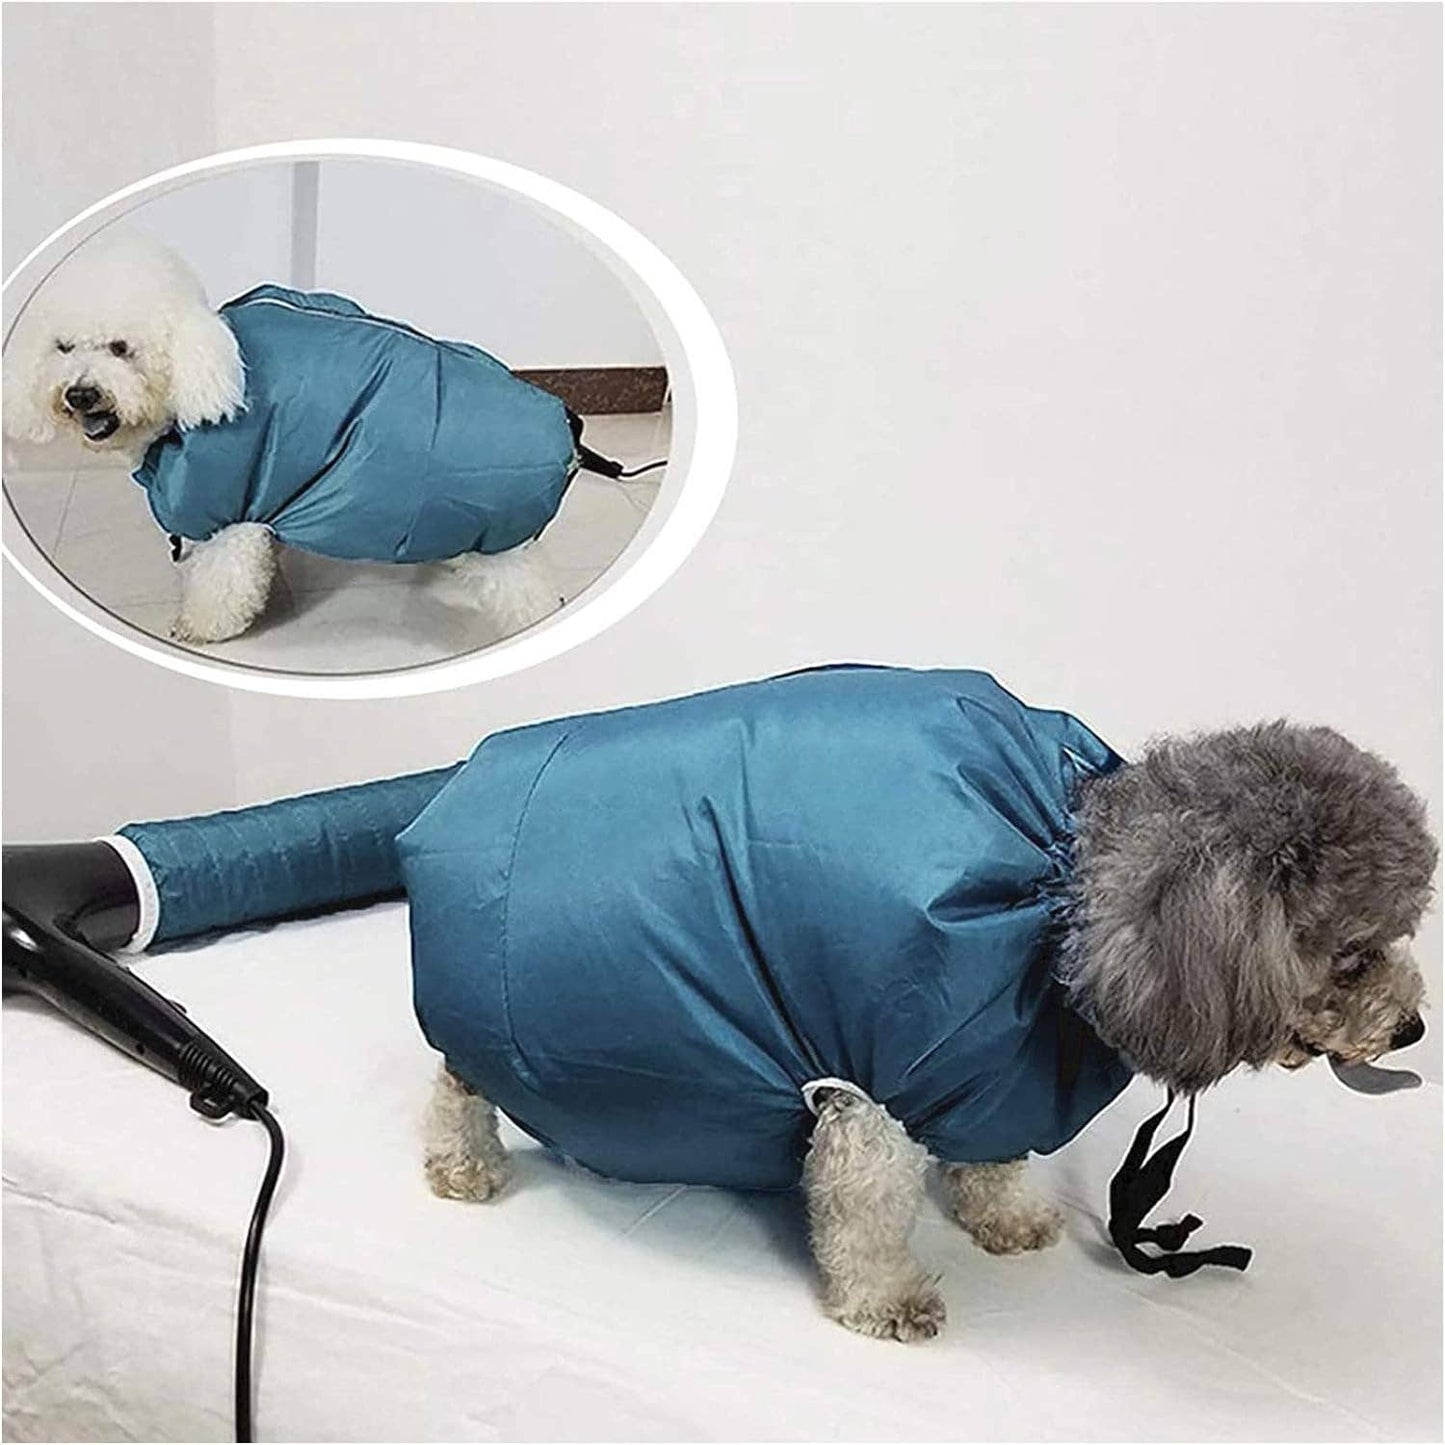 NEW SMALL SIZE pet circulating cloth dryer tool